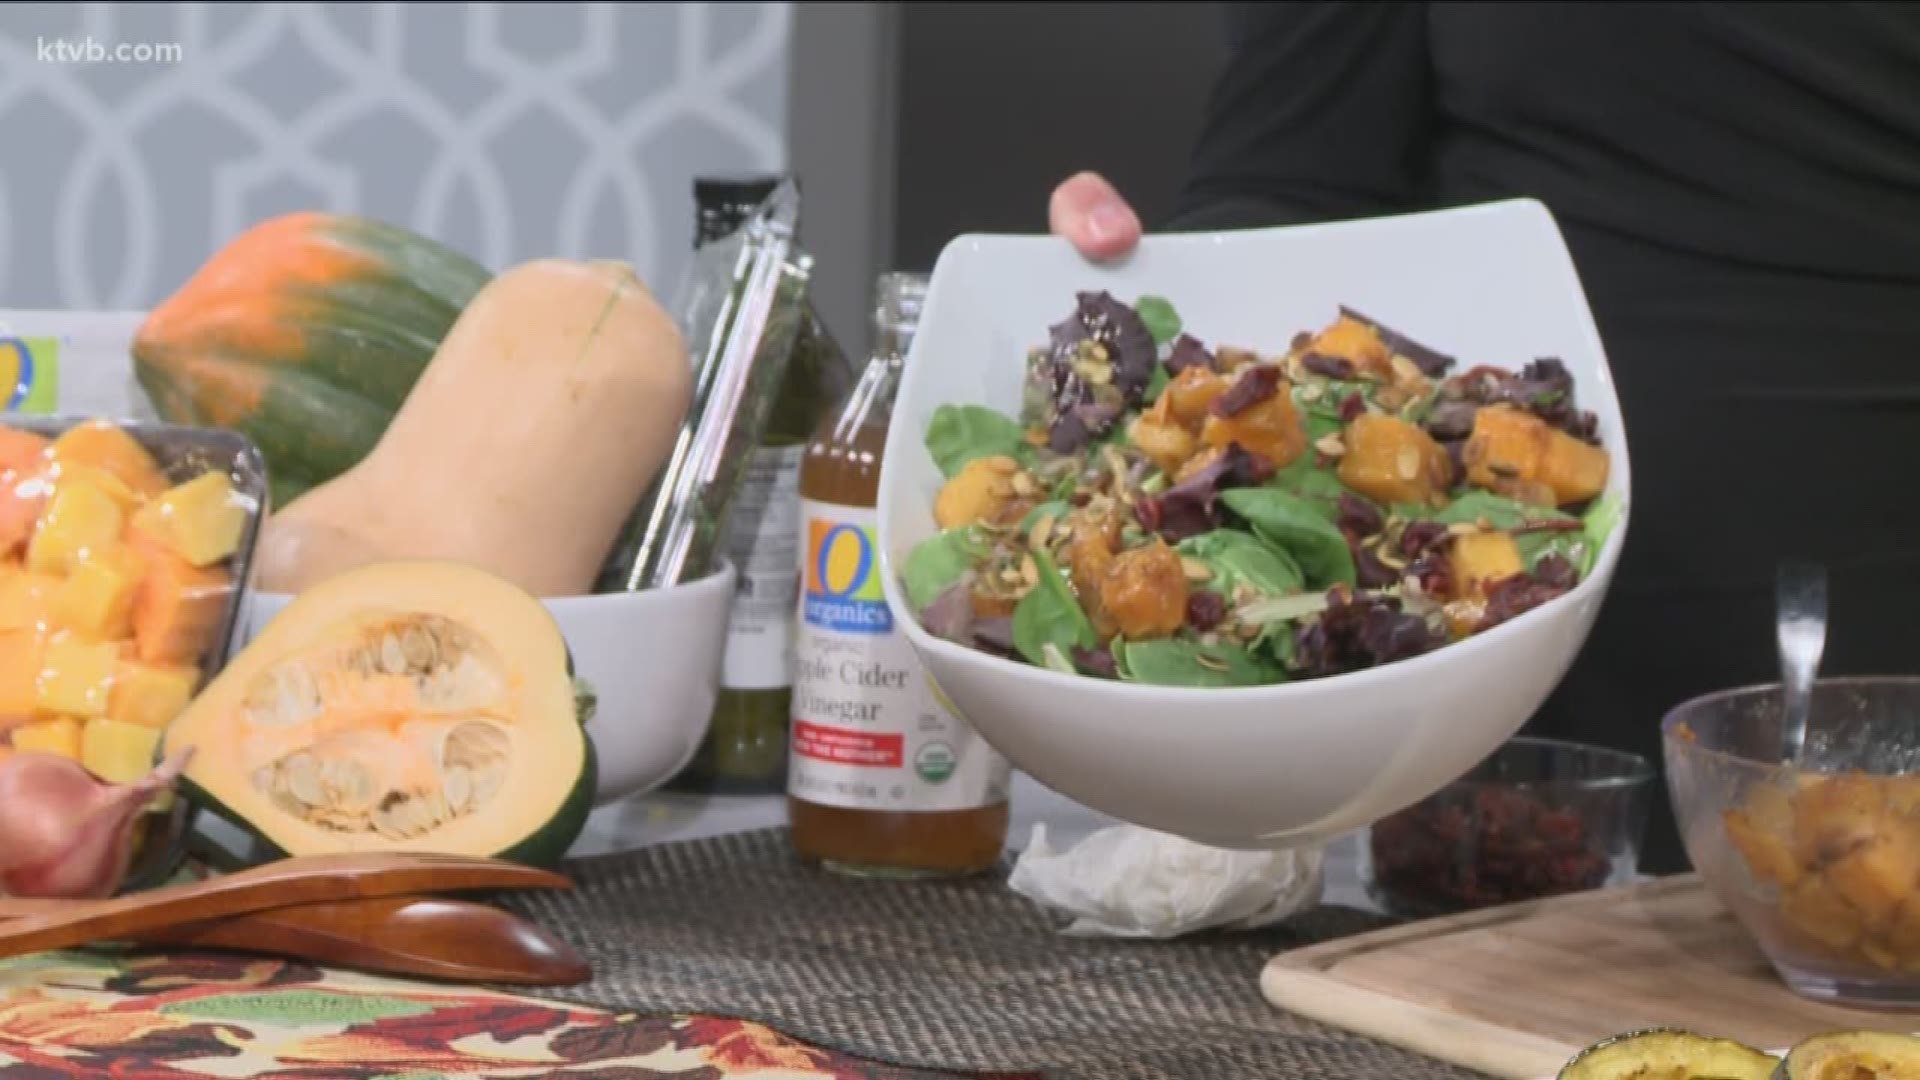 Dietitian Molly Tevis shows us how to make this healthy fall recipe.